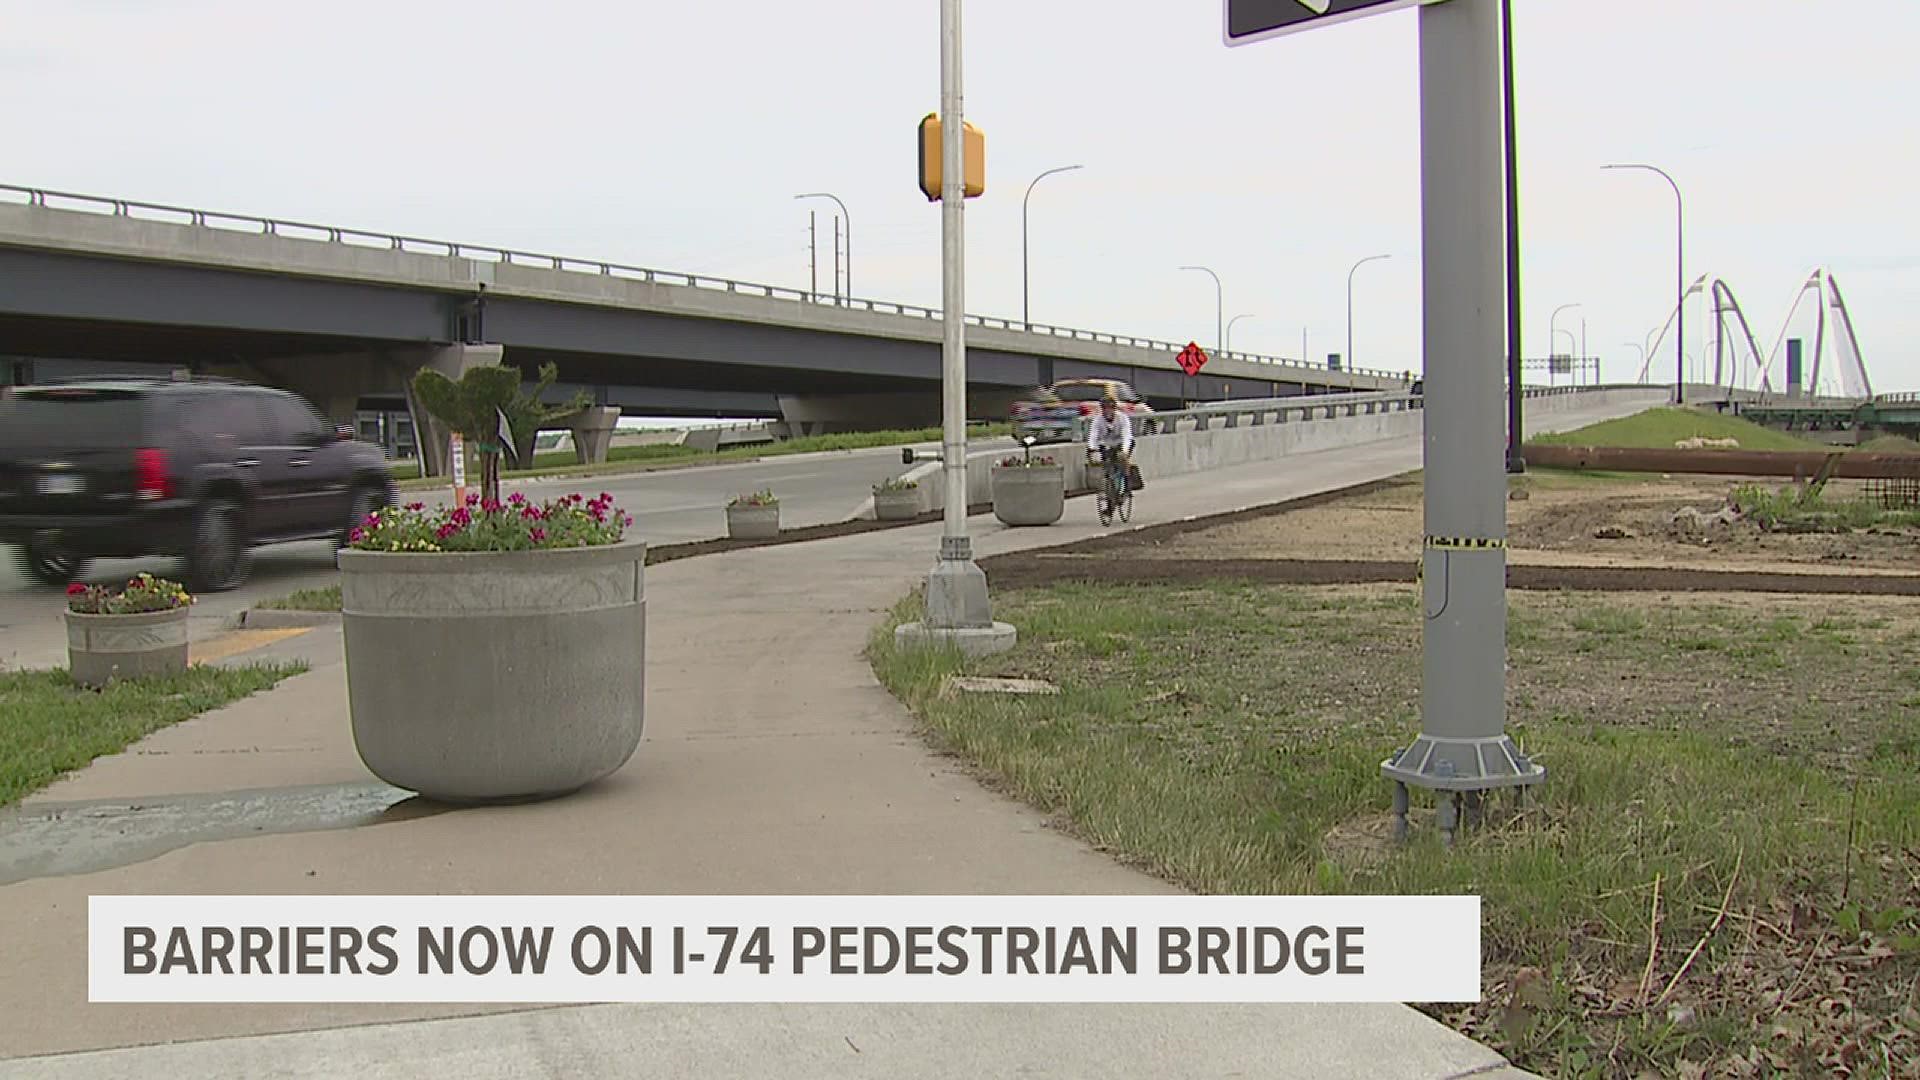 The Iowa Department of Transportation, Bettendorf and Moline are installing barriers to the I-74 bike path while a permanent safety solution is being determined.